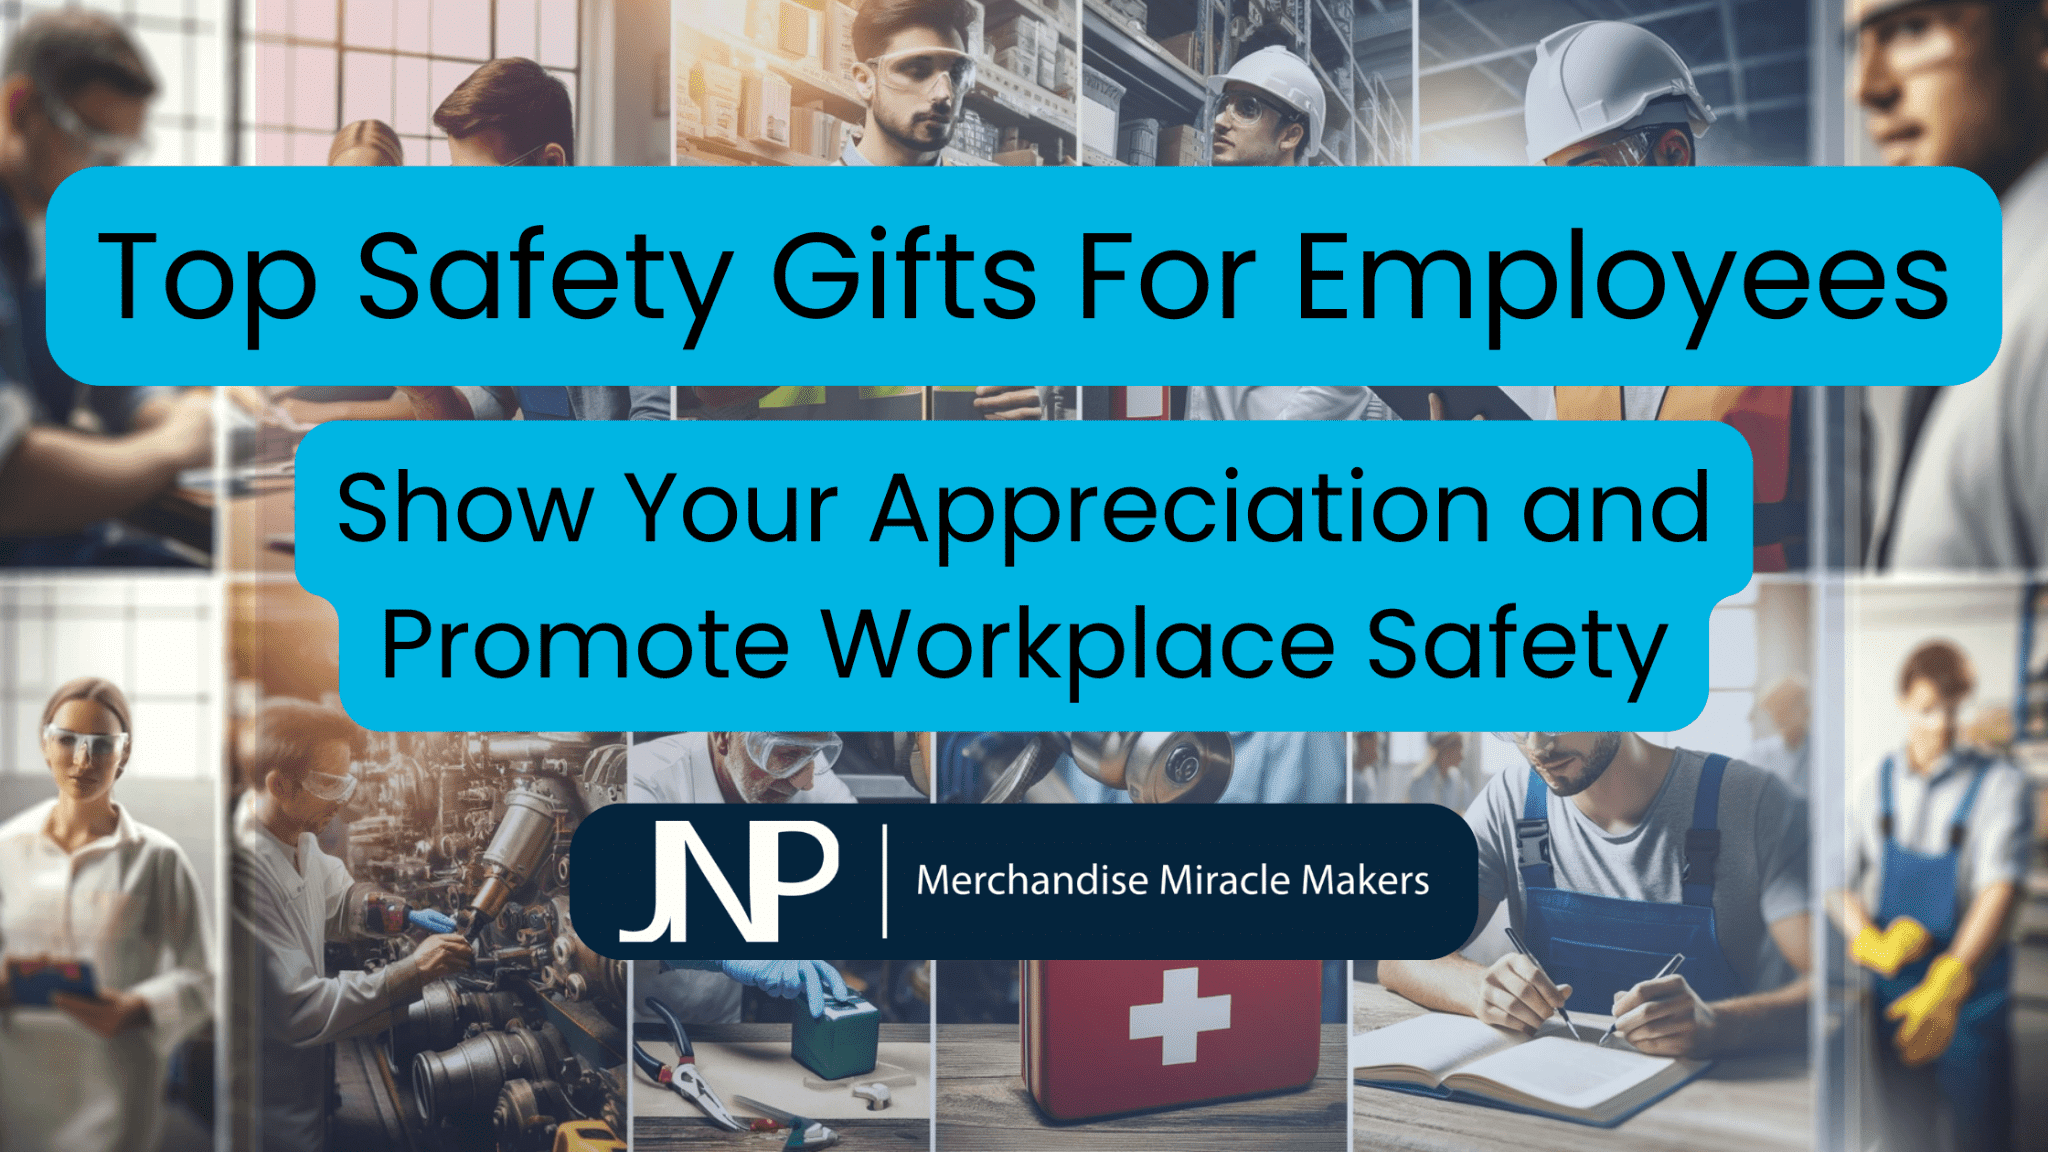 Top Safety Gifts for Employees: Show Your Appreciation and Promote Workplace Safety